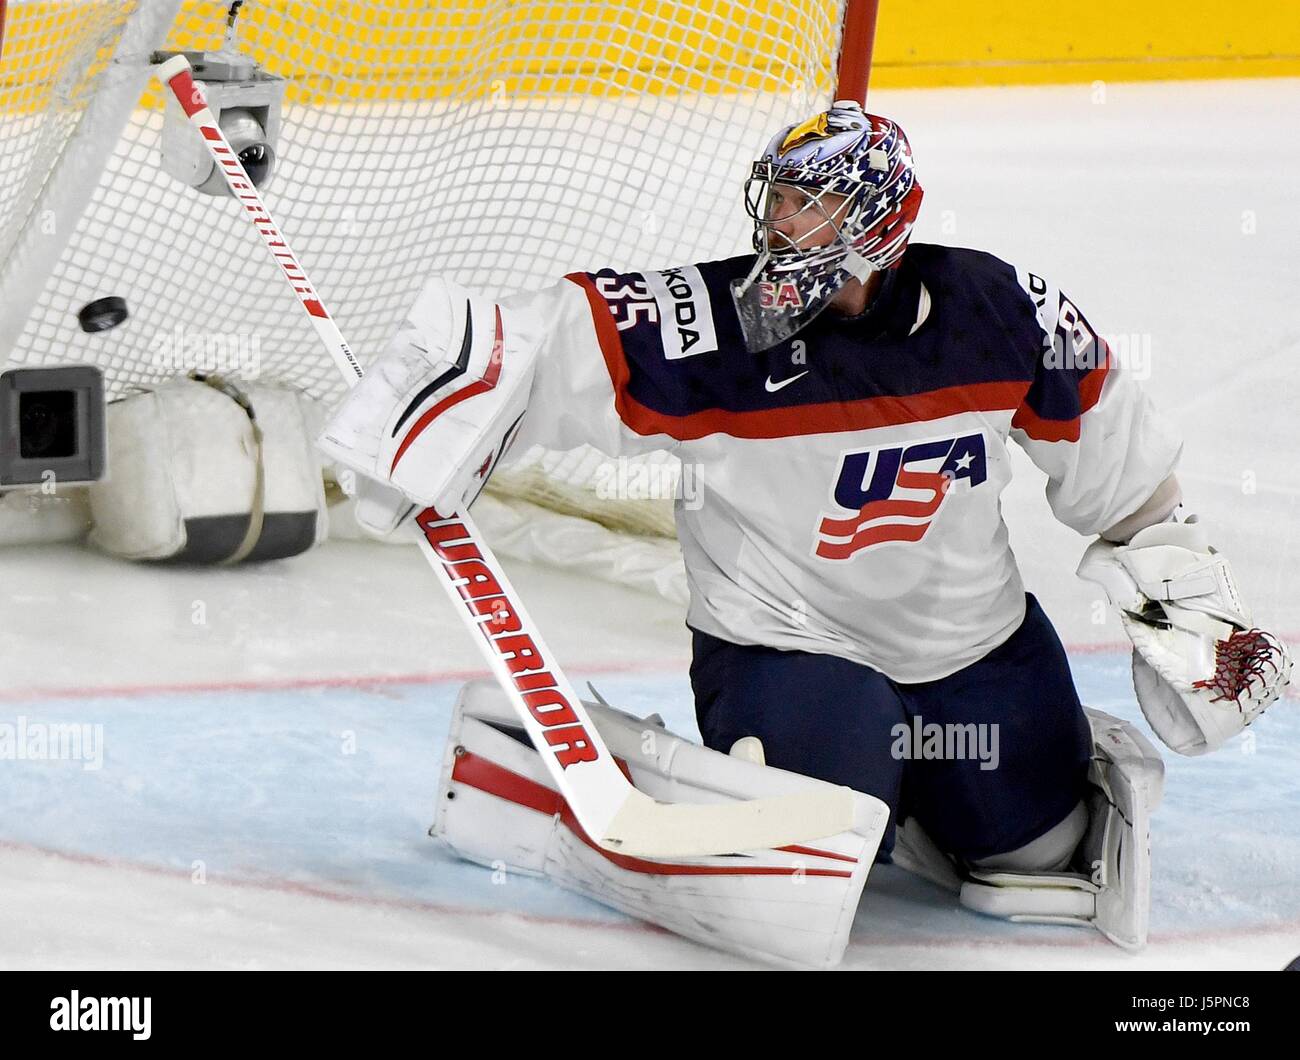 Cologne, Germany. 18th May, 2017. US goalkeeper Torwart Jimmy Howard rejects a shot during the Ice Hockey World Championship quarter-final match between the US and Finland in the Lanxess Arena in Cologne, Germany, 18 May 2017. Photo: Monika Skolimowska/dpa/Alamy Live News Stock Photo